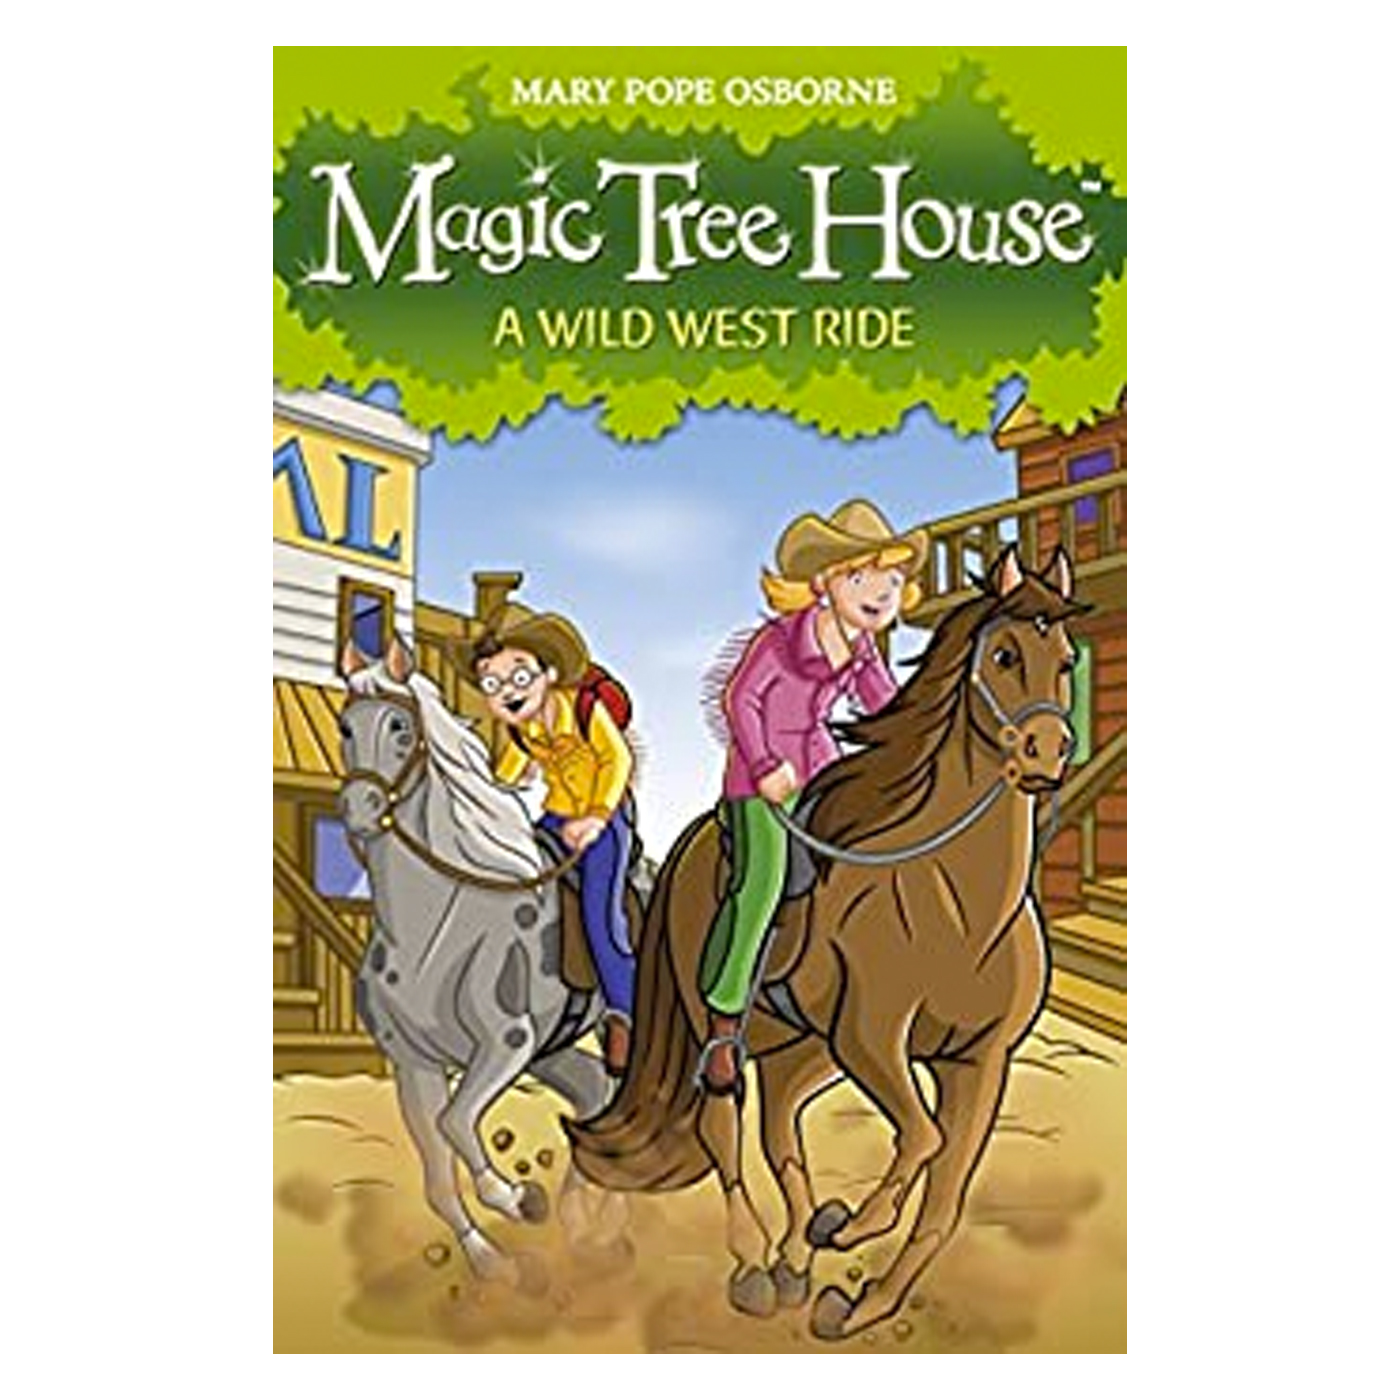  Magic Tree House 10: A Wild West Ride